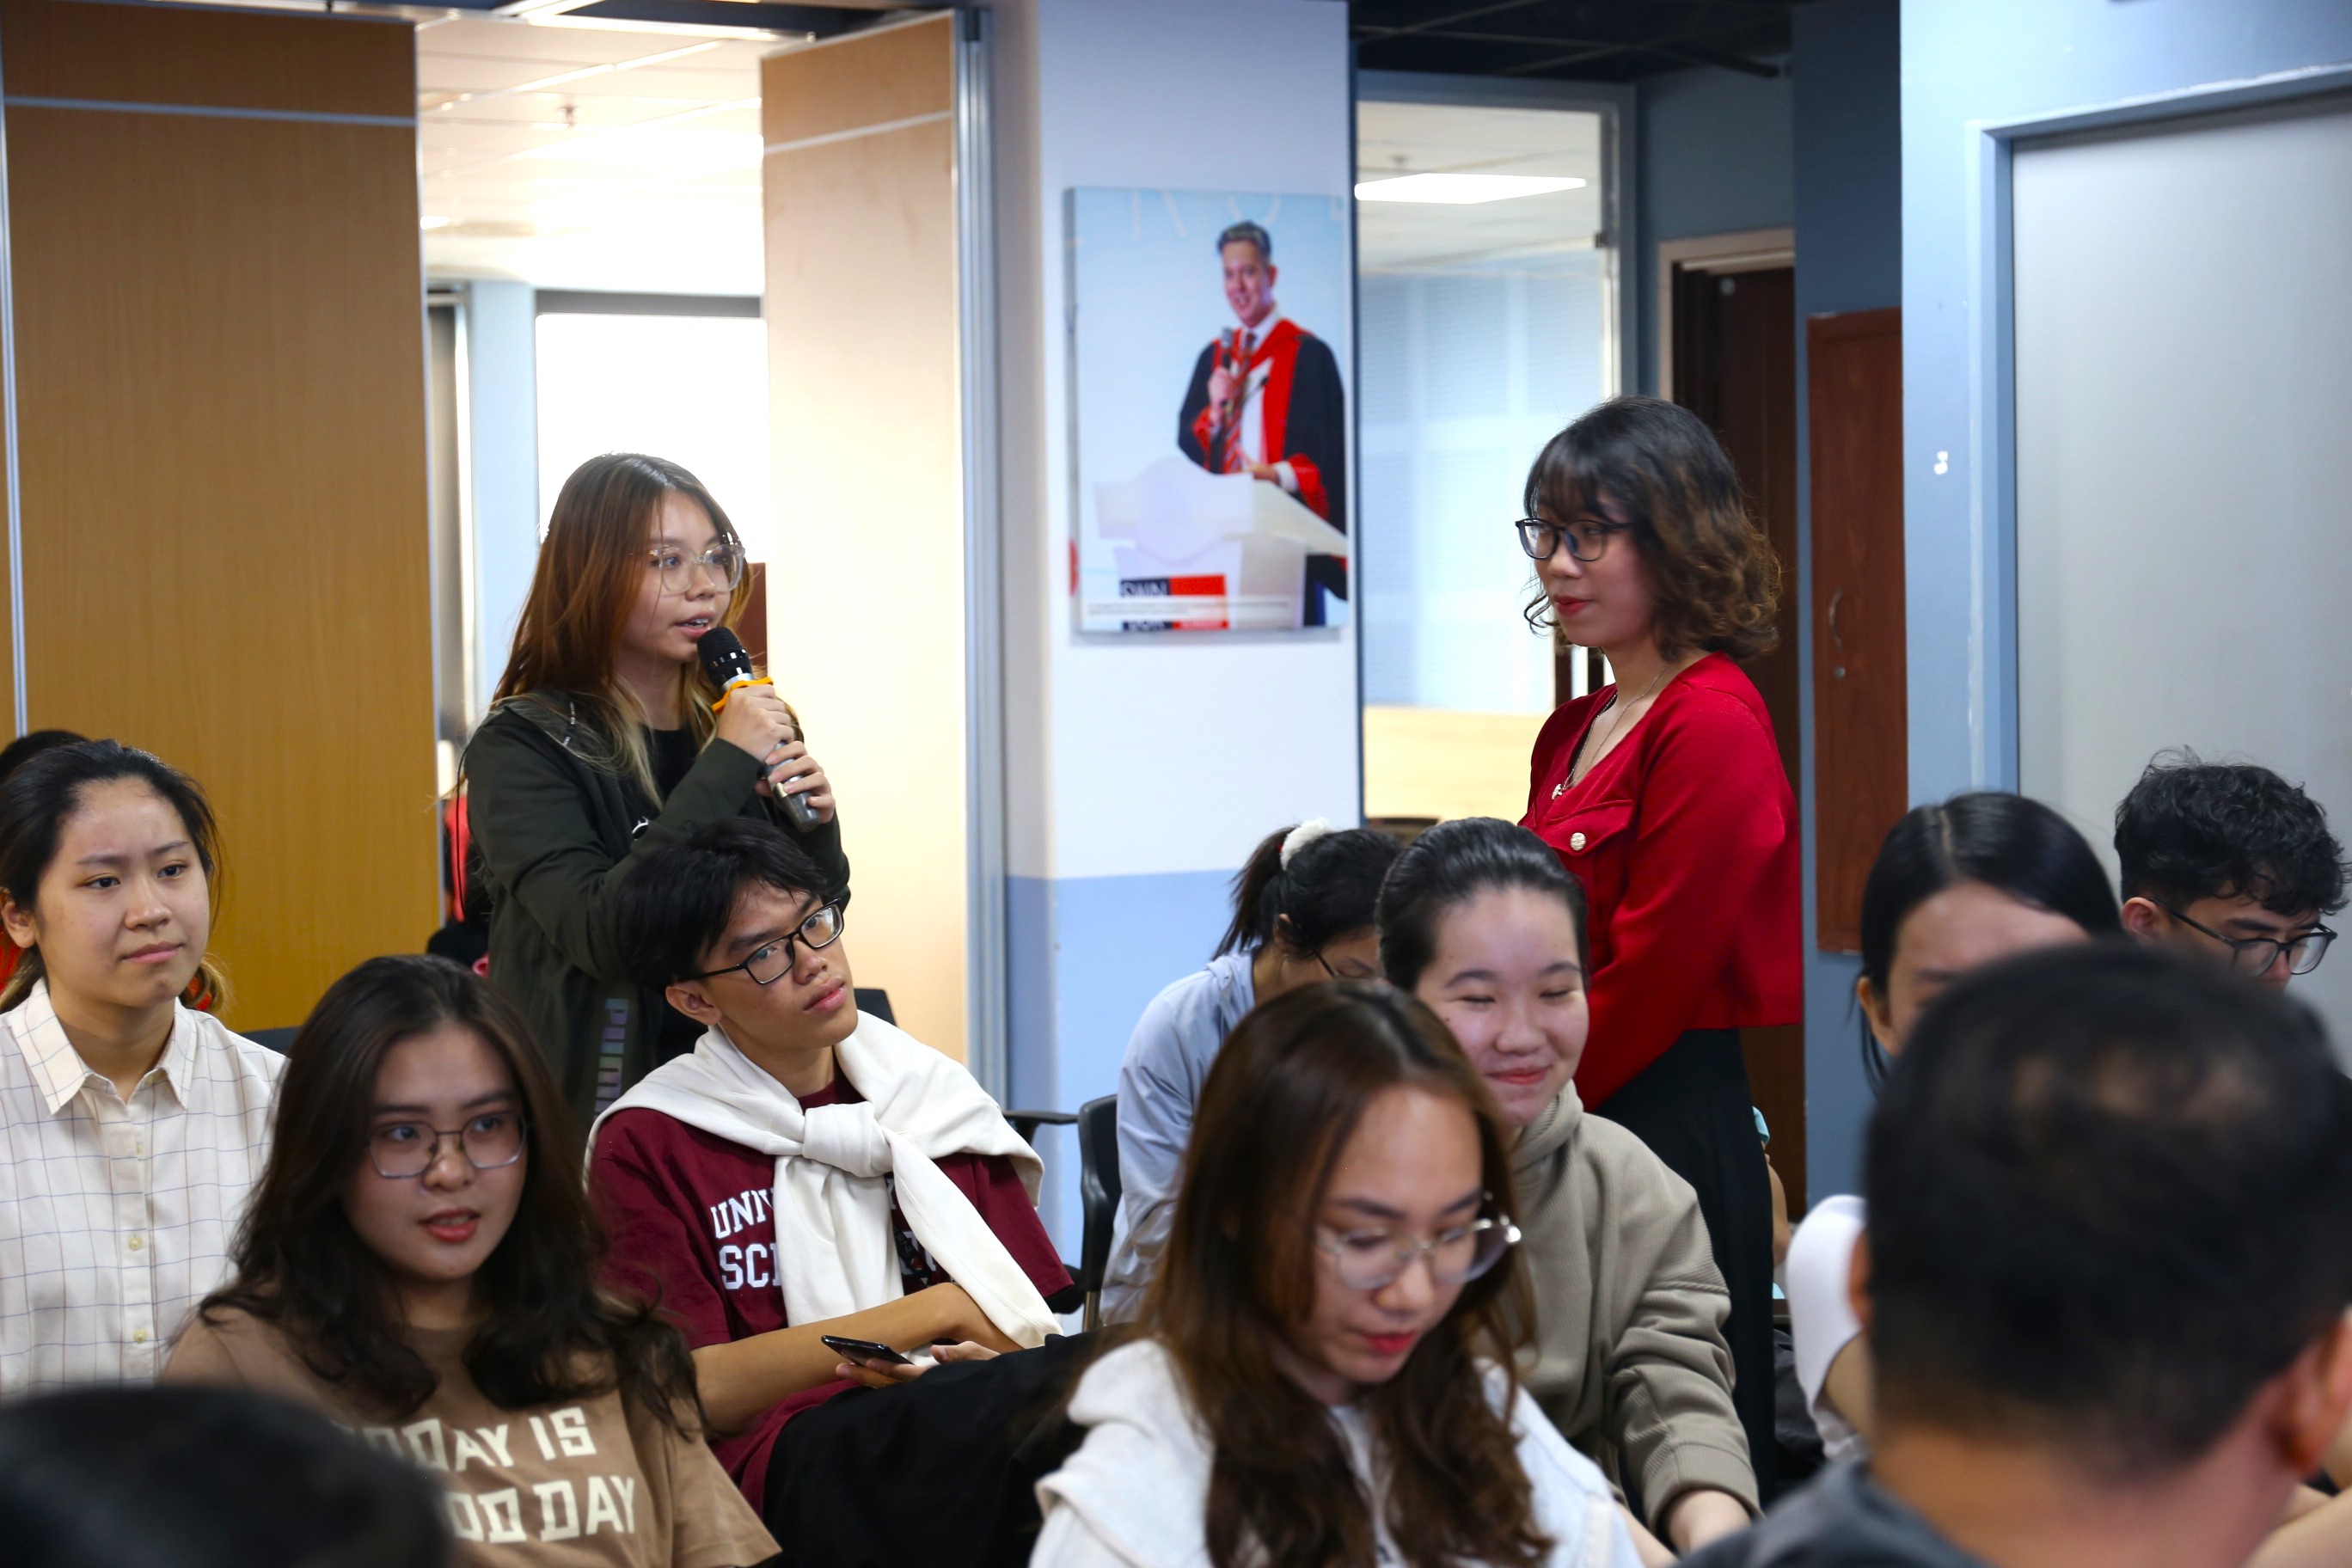 Manpower Vietnam expert consults students about job search skills